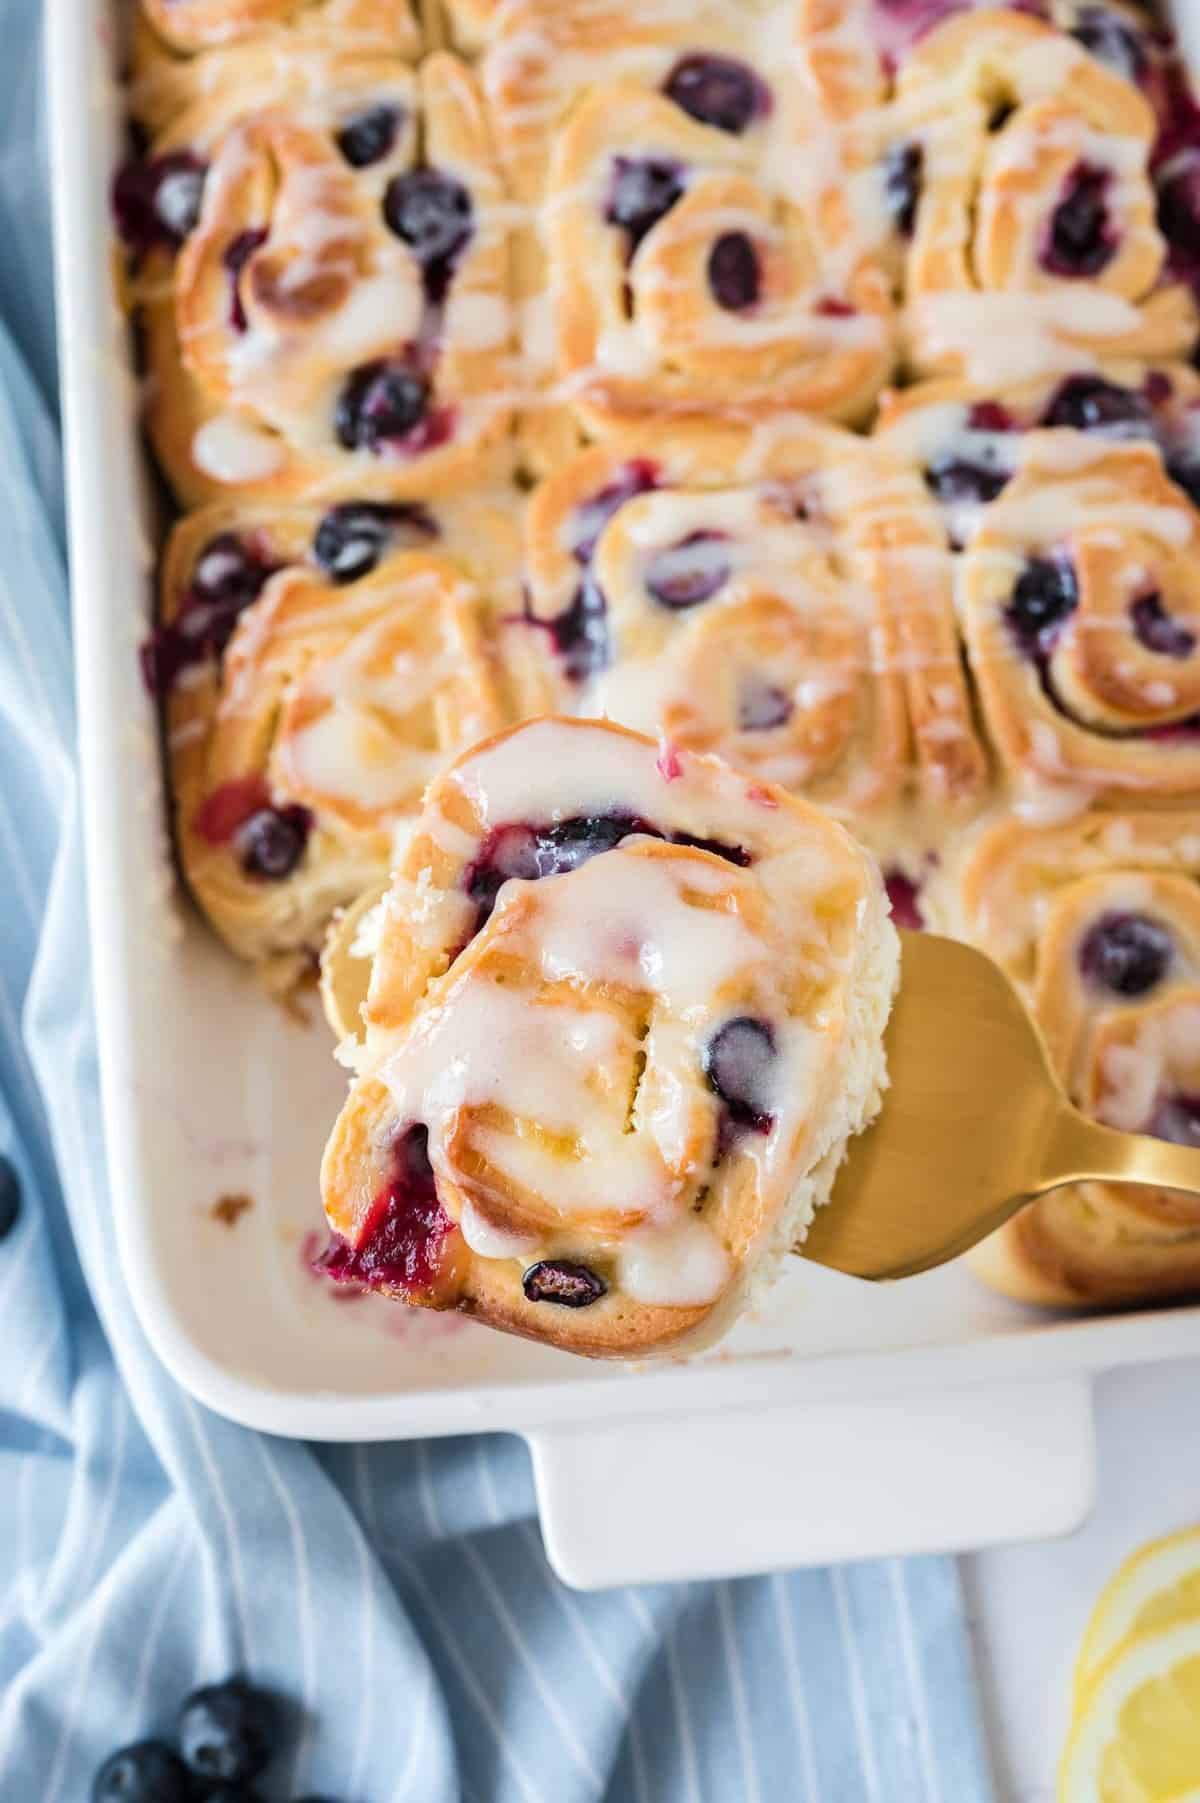 Blueberry roll with glaze being taken out of a pan with a spatula.